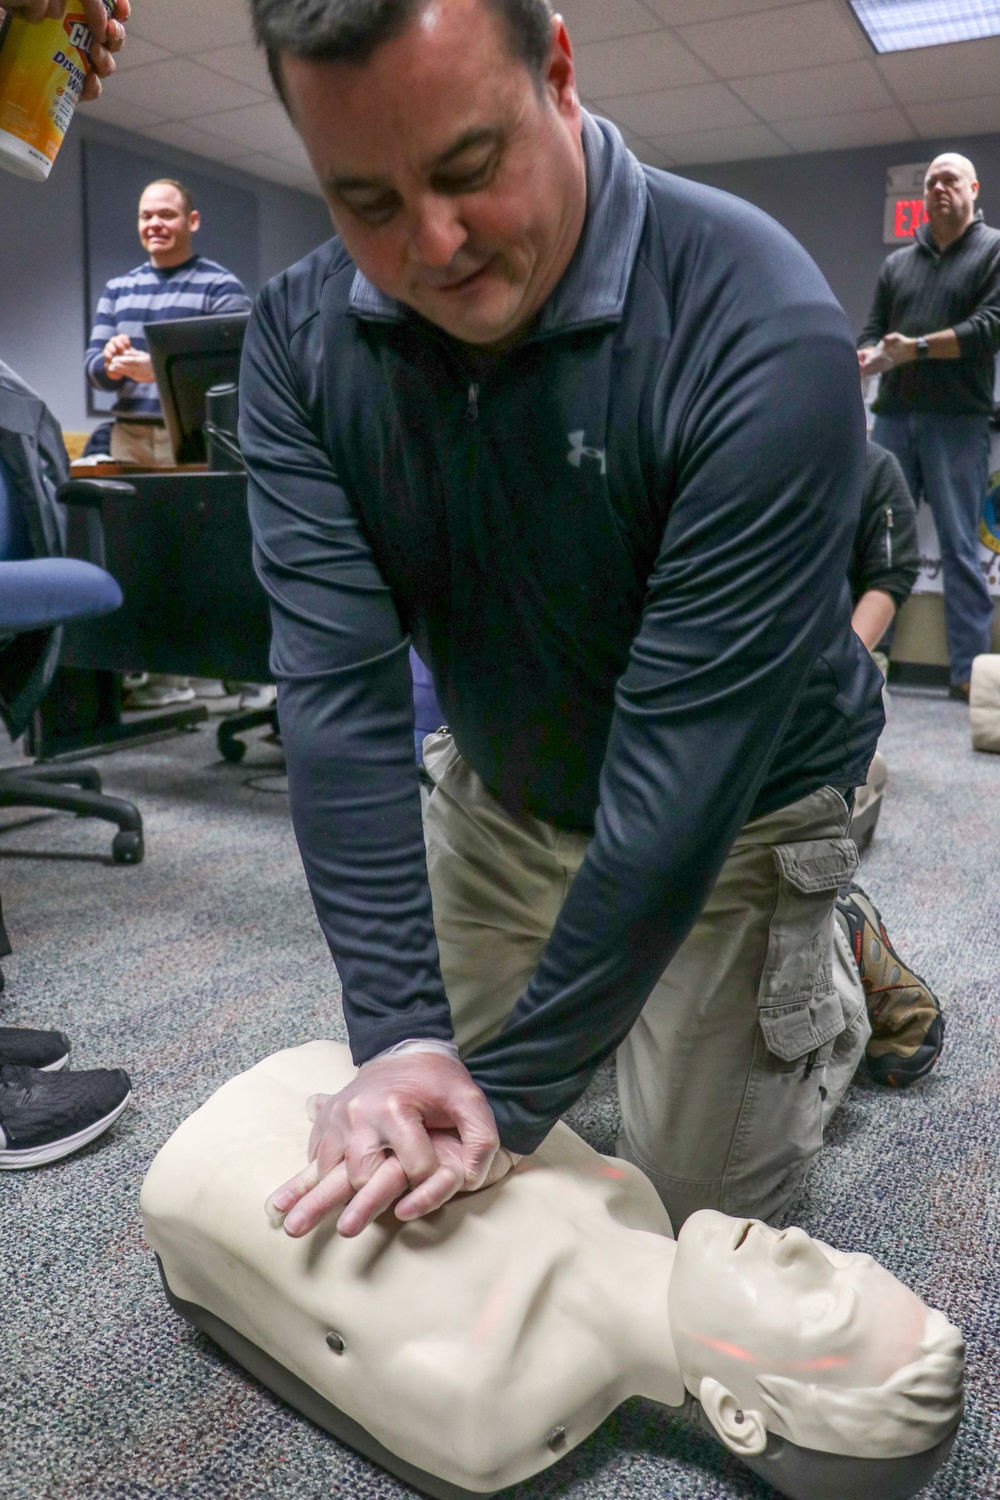 Student practices CPR